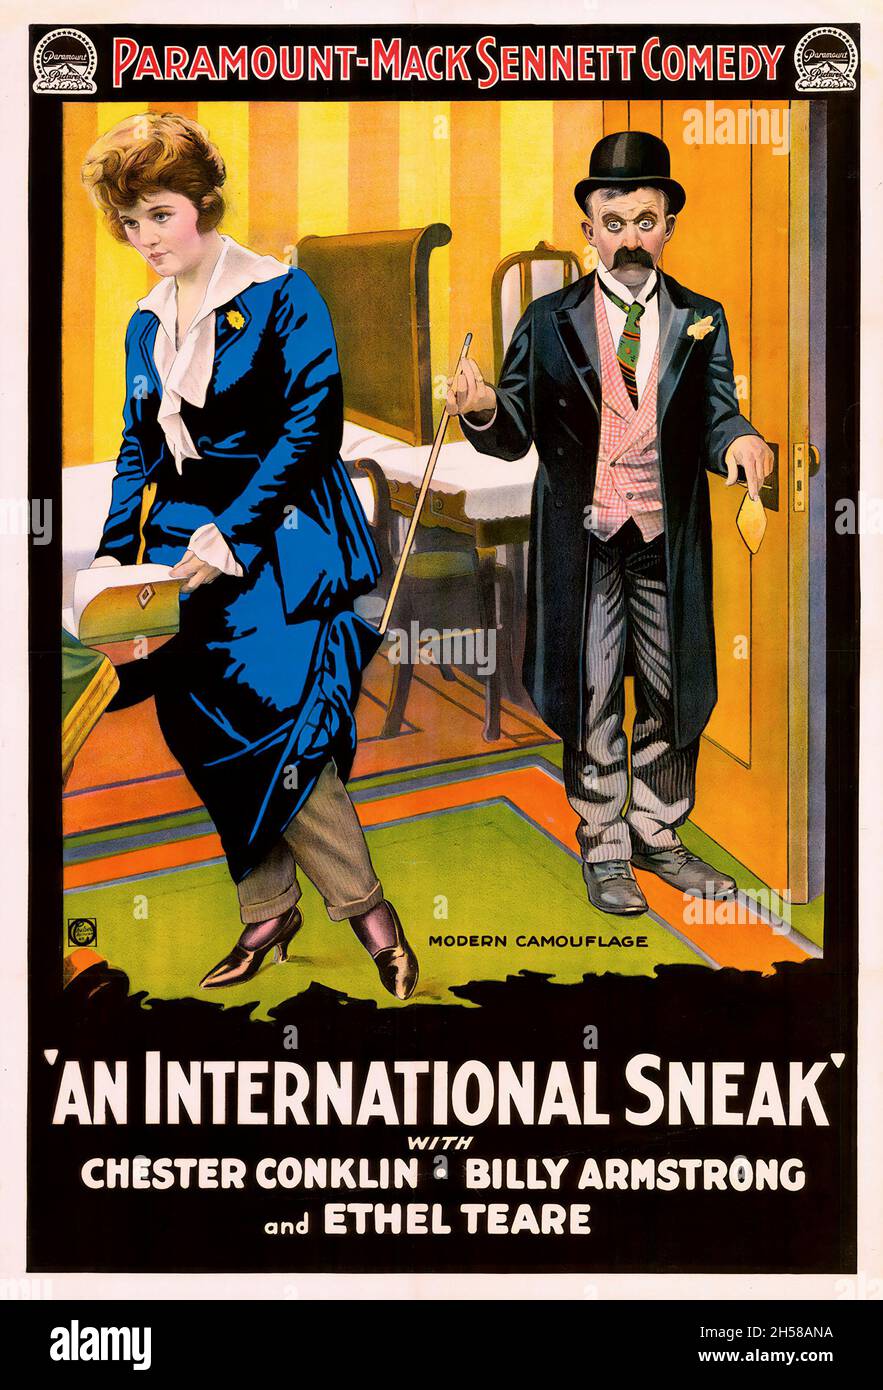 Old and vintage movie / film poster for the 1917 film An International Sneak with Chester Conklin, Billy Armstrong and Ethel Teare. Stock Photo